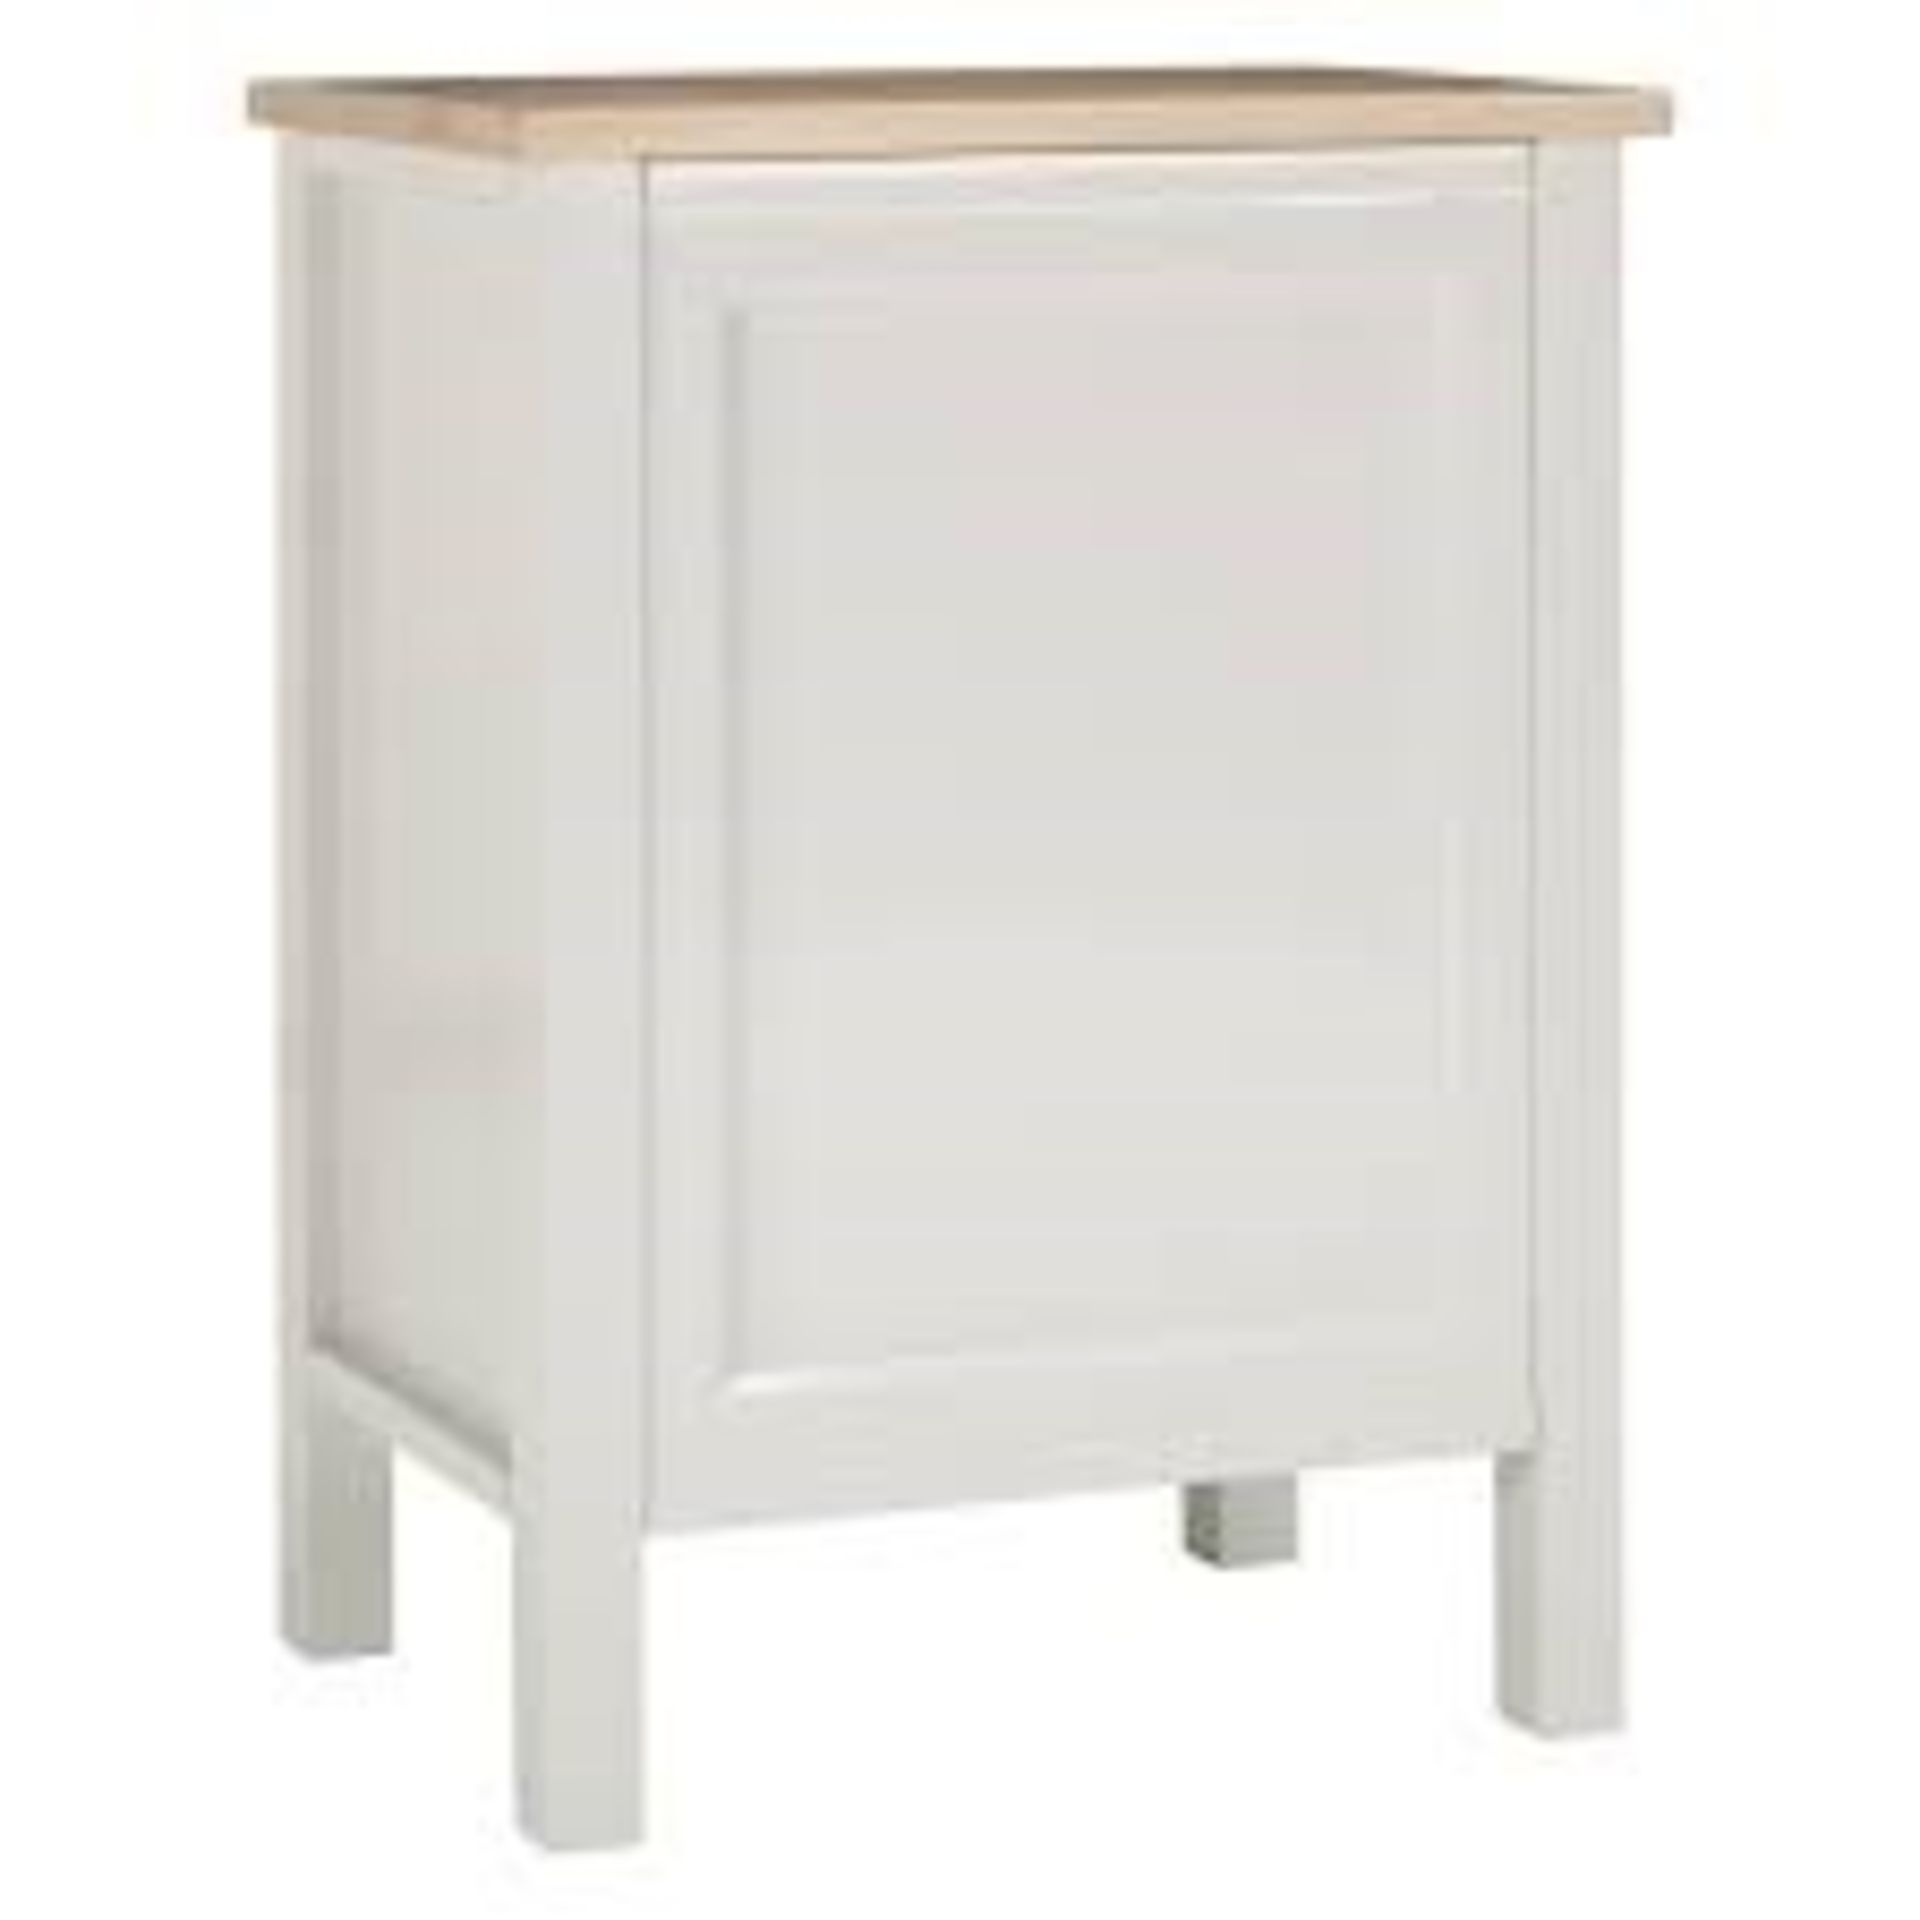 Boxed John Lewis and Partners St Ives Solid White Wooden Linen Bin RRP £150 (1516153)(Viewing or